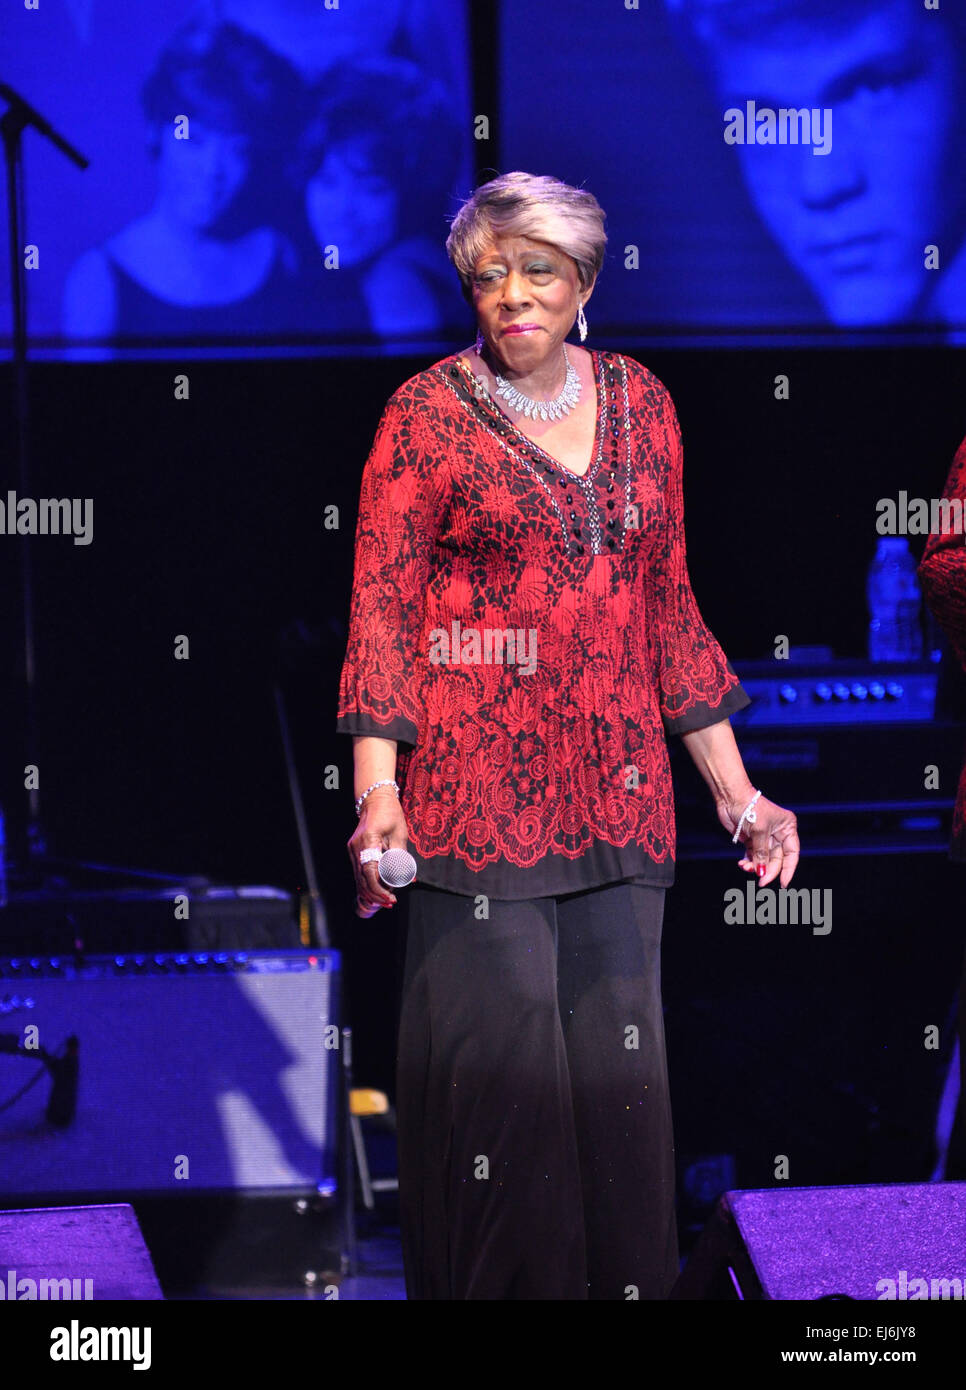 Emporia, Virginia, USA. 21st Mar, 2015. JUDY CRAIG, original lead singer of The Chiffons, .performing at the Greensville Performing Arts Center in Emporia, VA as part of the Original Stars of American Bandstand touring group. © Tina Fultz/ZUMA Wire/Alamy Live News Stock Photo